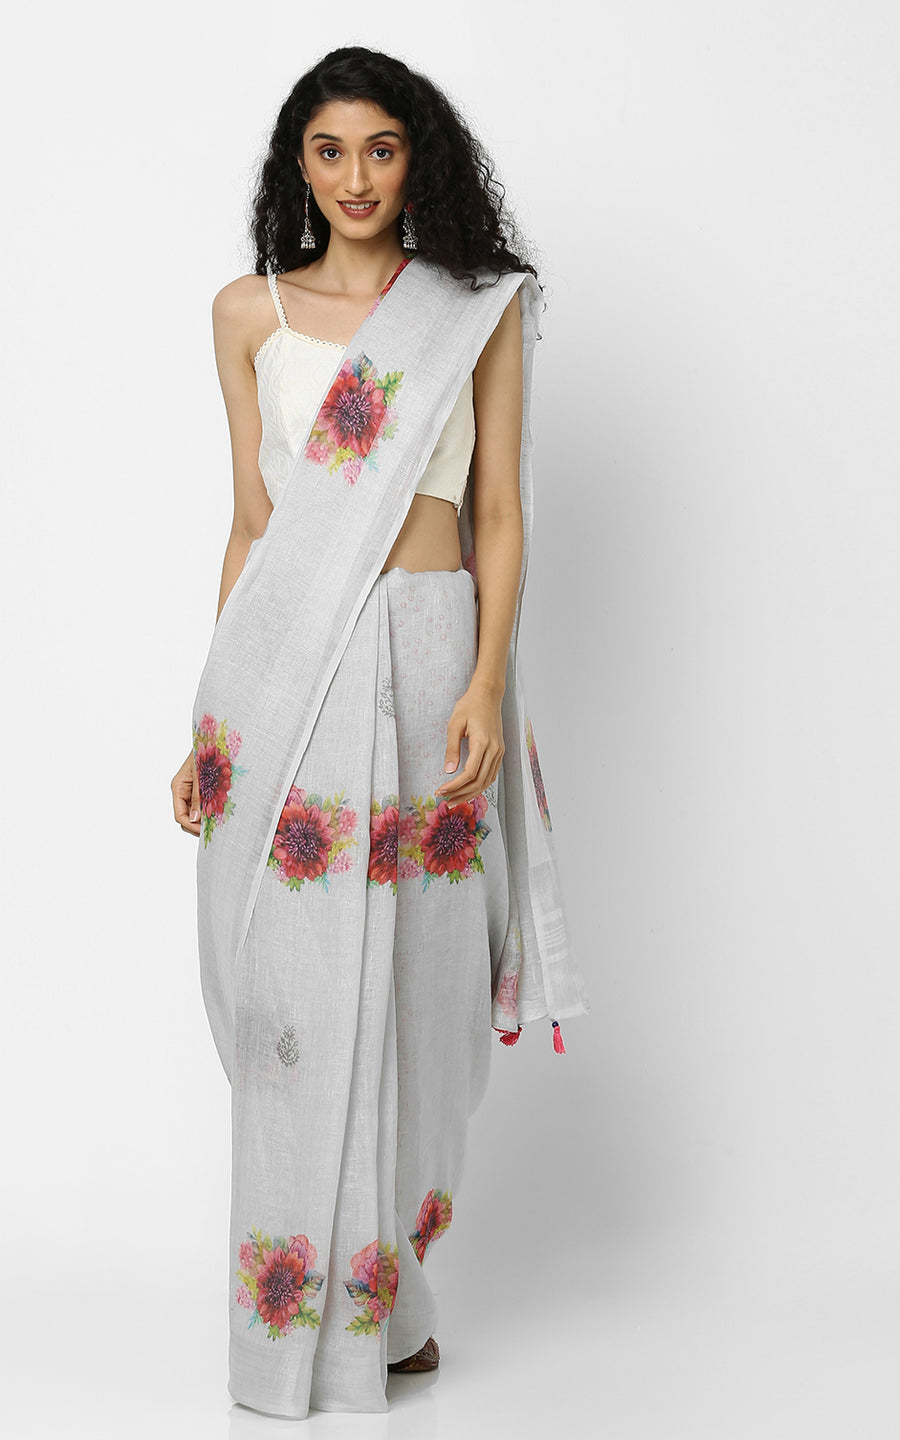 GREY LINEN SAREE WITH RED ROSES